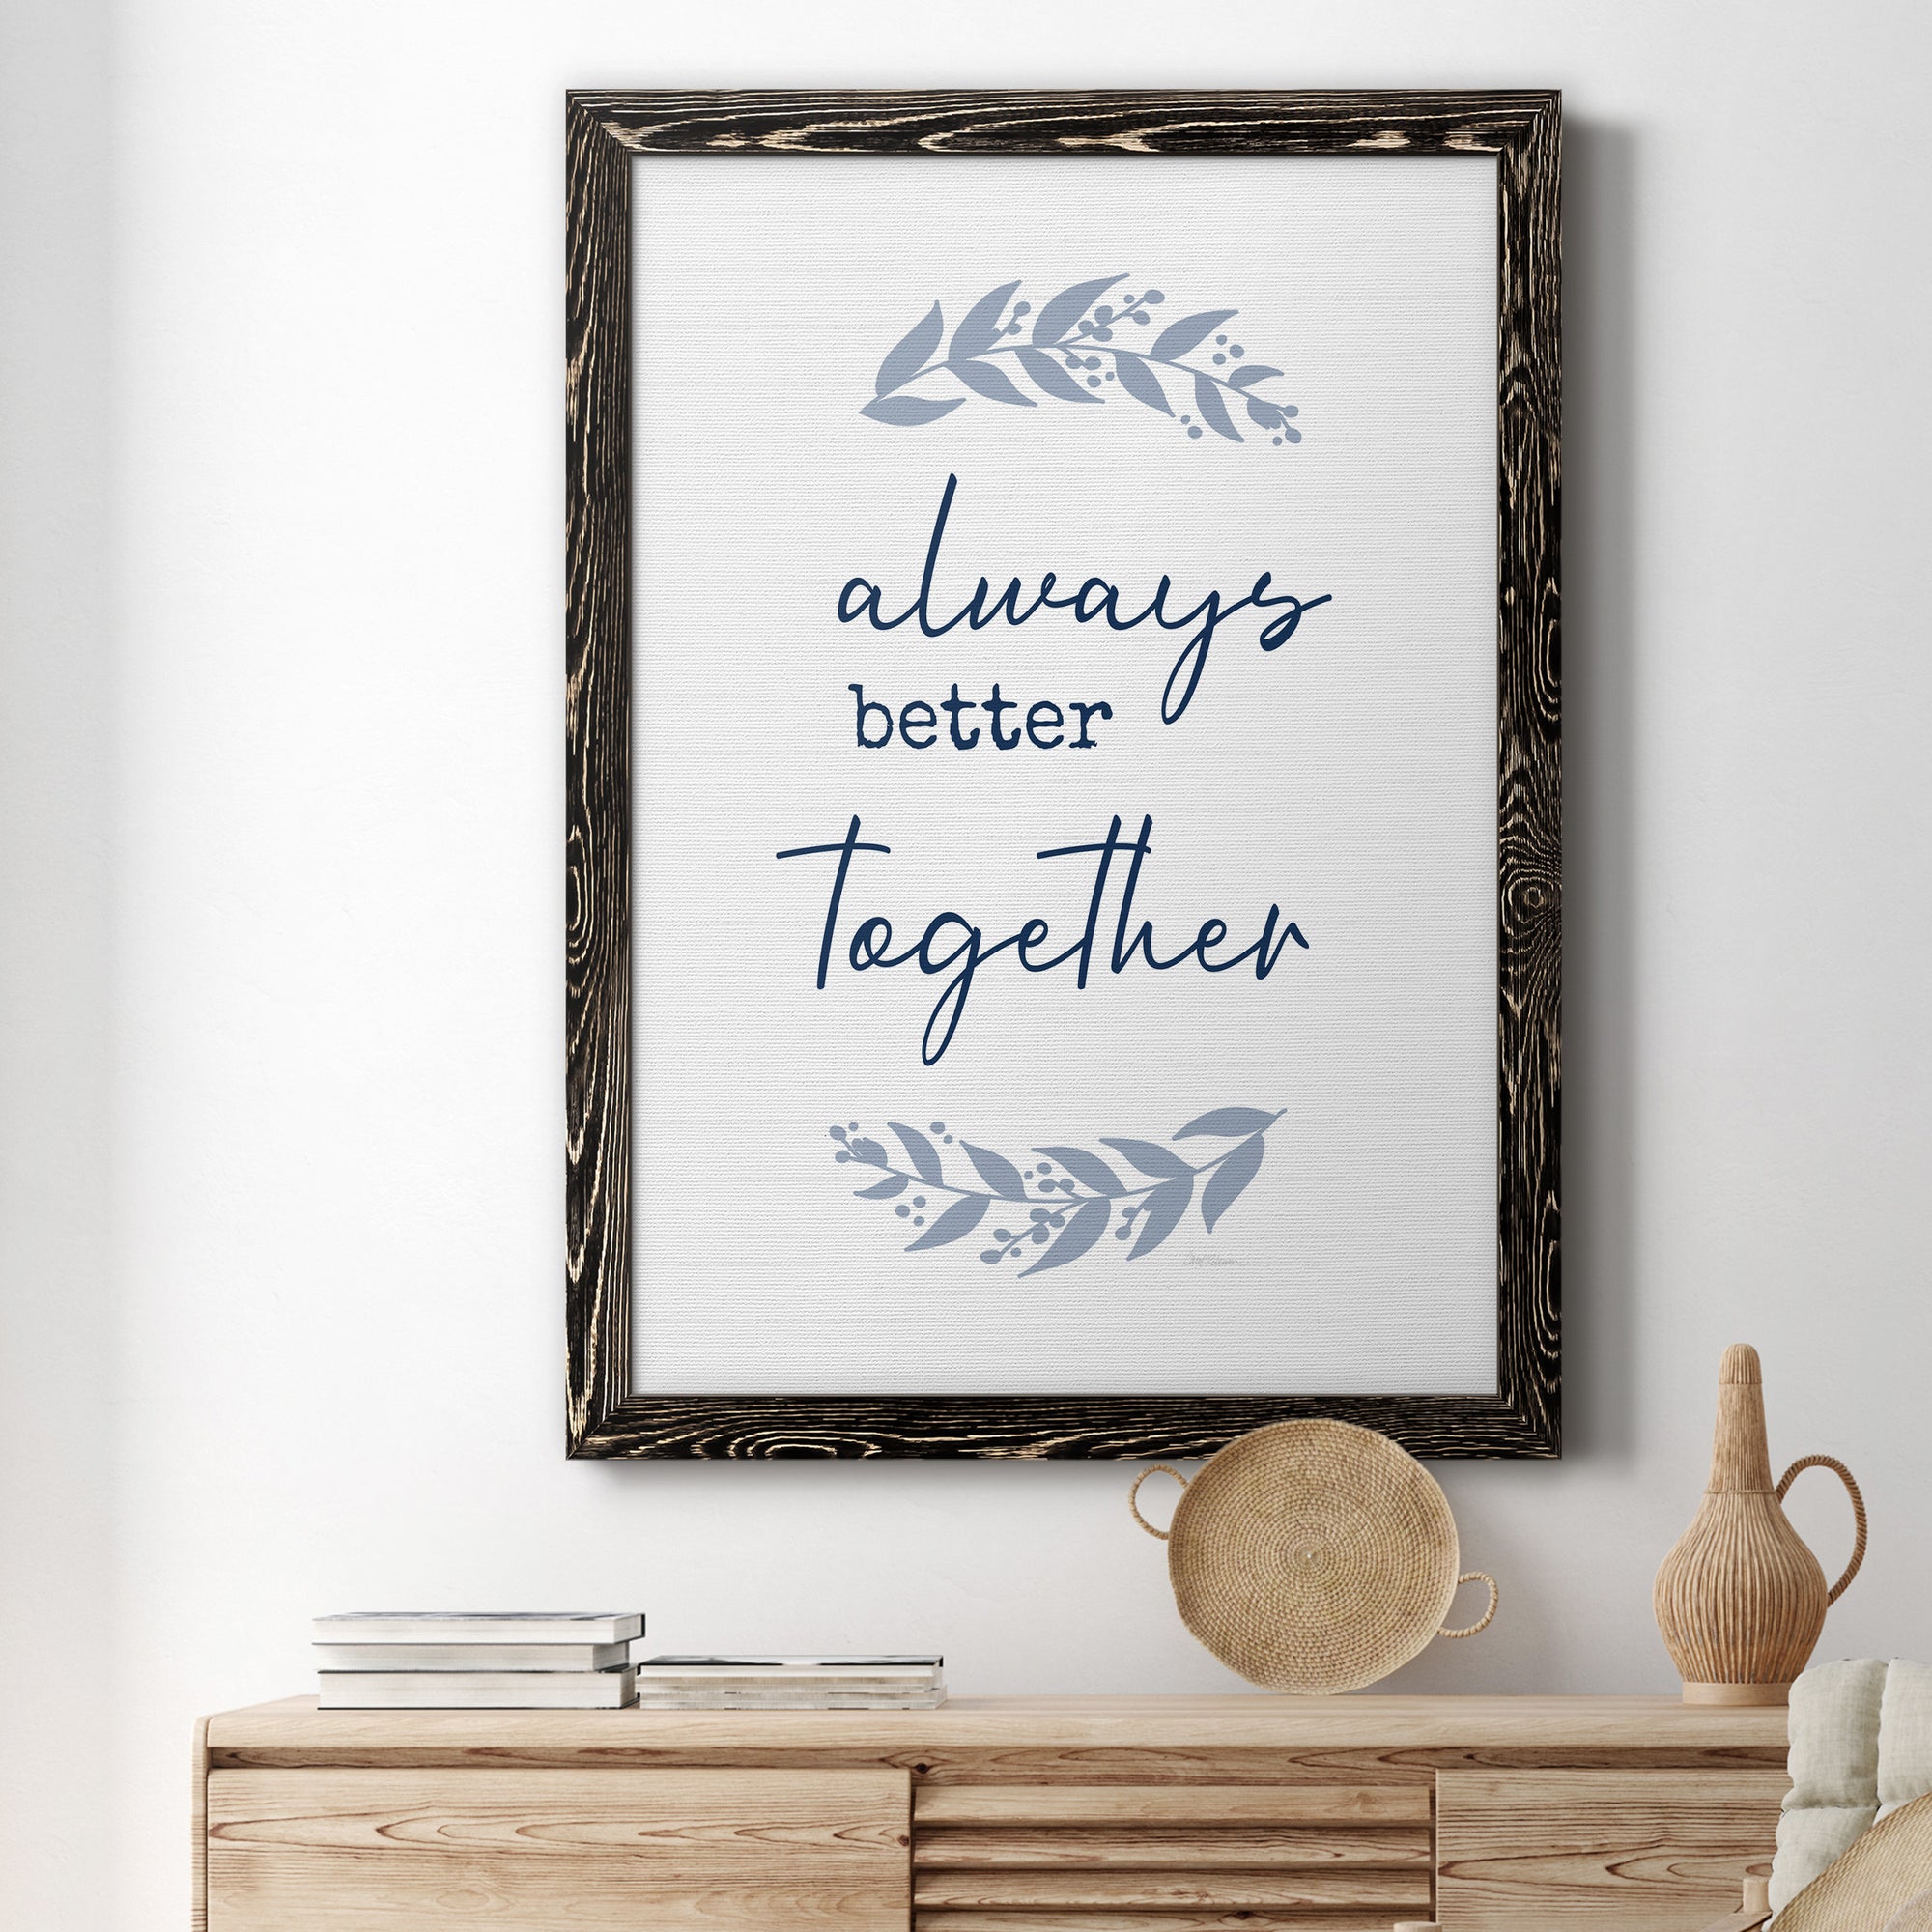 Always Together - Premium Canvas Framed in Barnwood - Ready to Hang